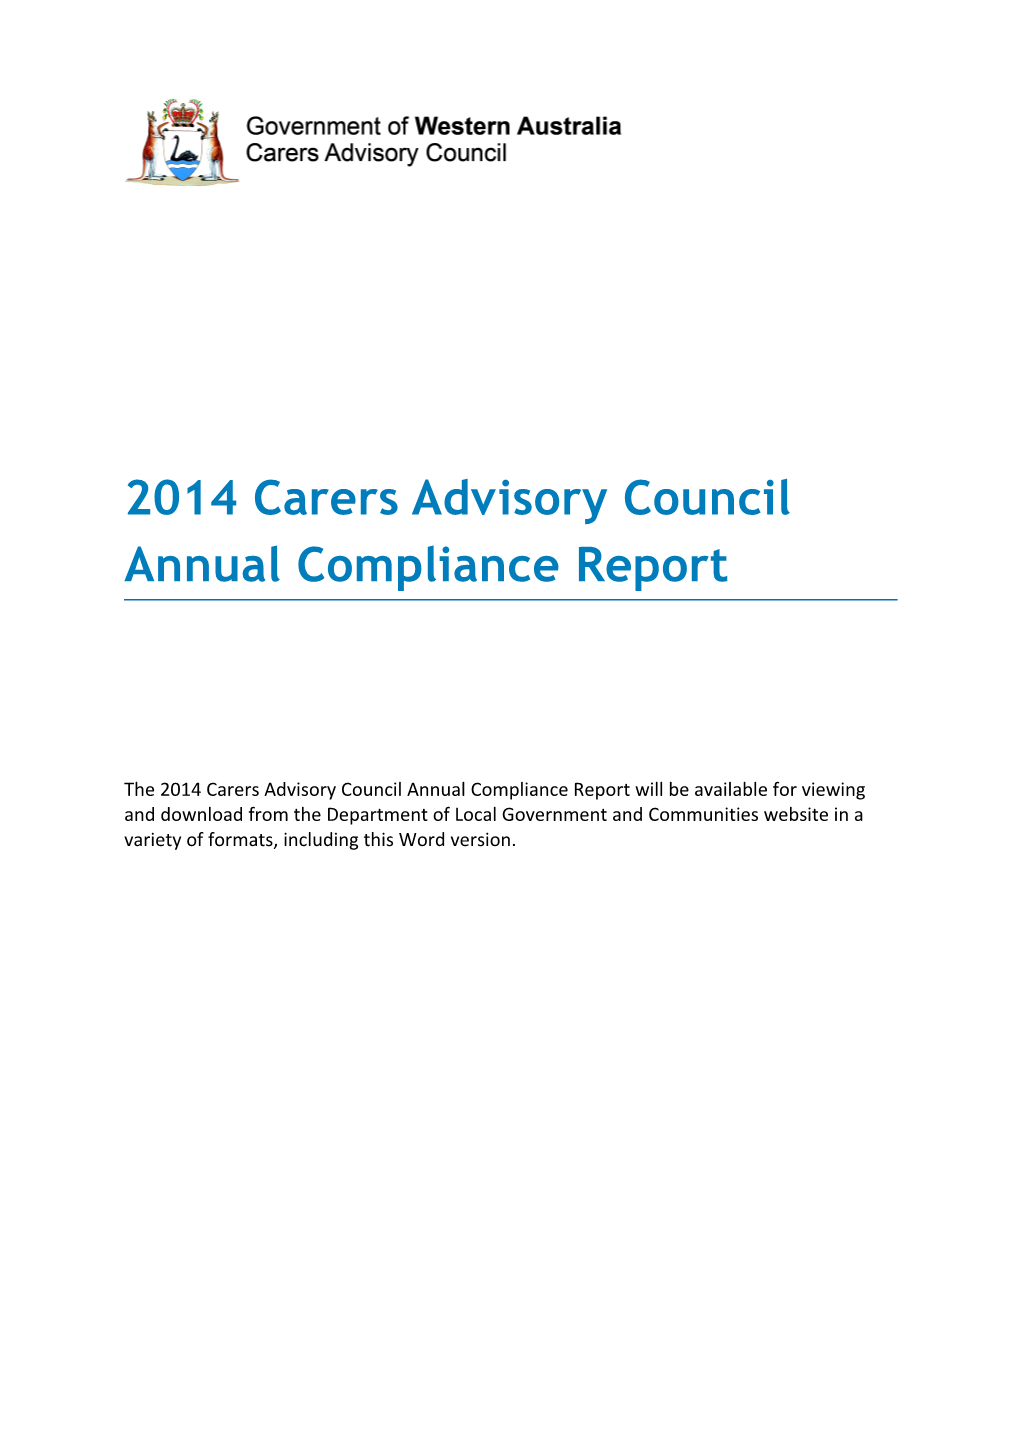 Carers Advisory Council Annual Compliance Report 2013-14